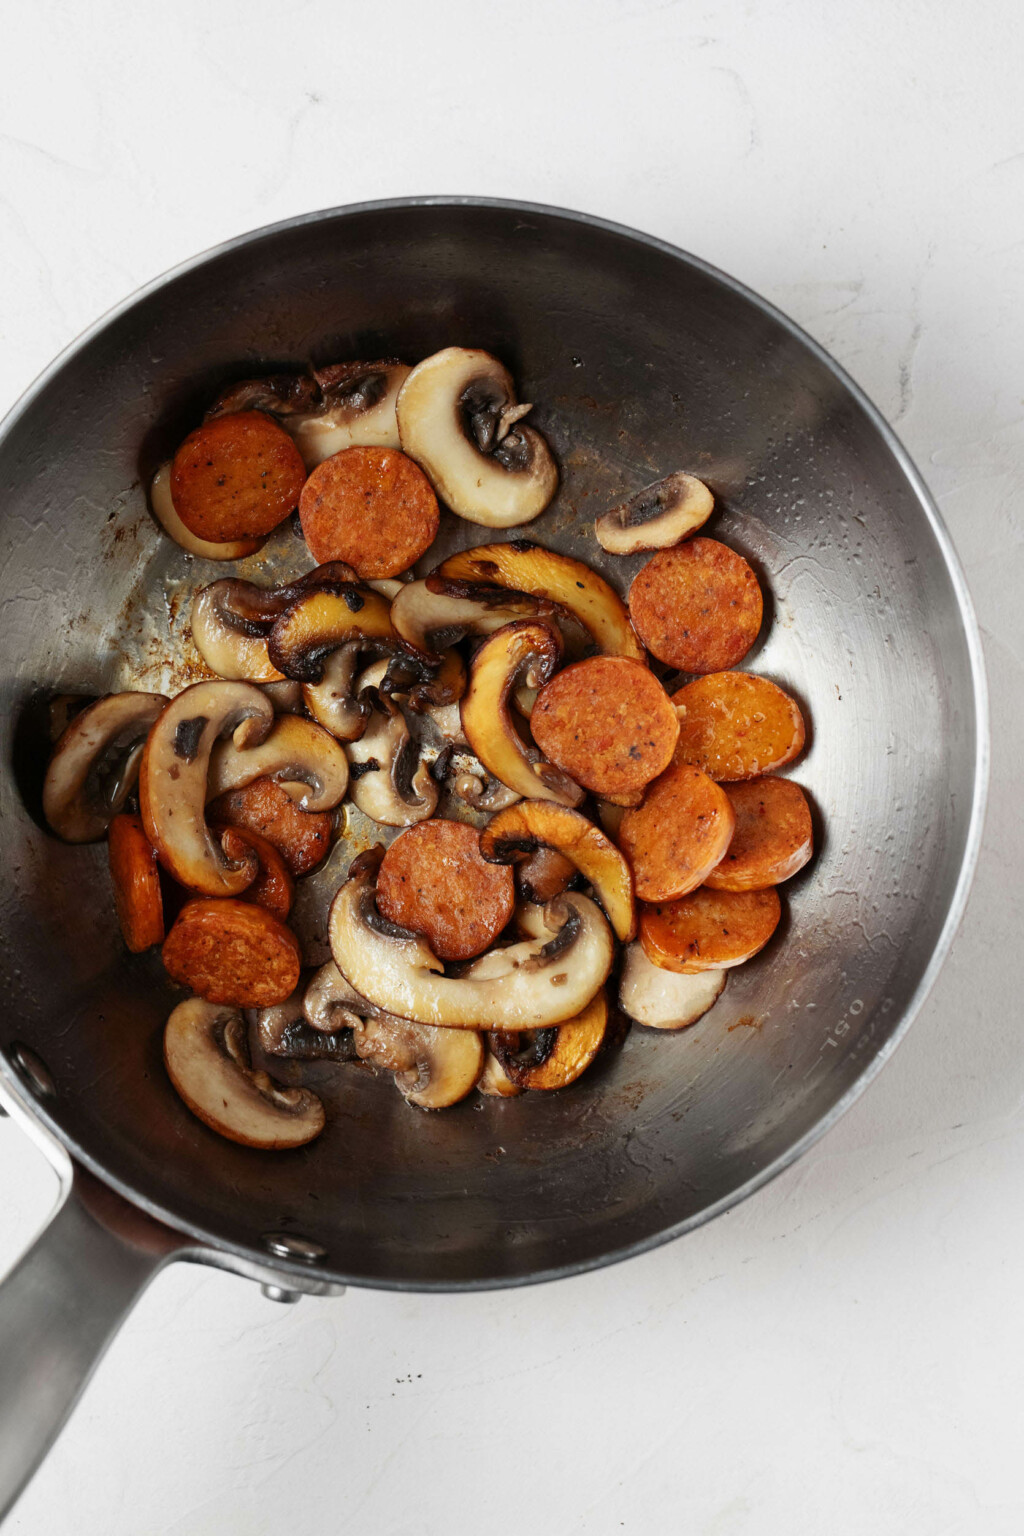 A silver skillet is being used to sauté sliced mushrooms and sausage.